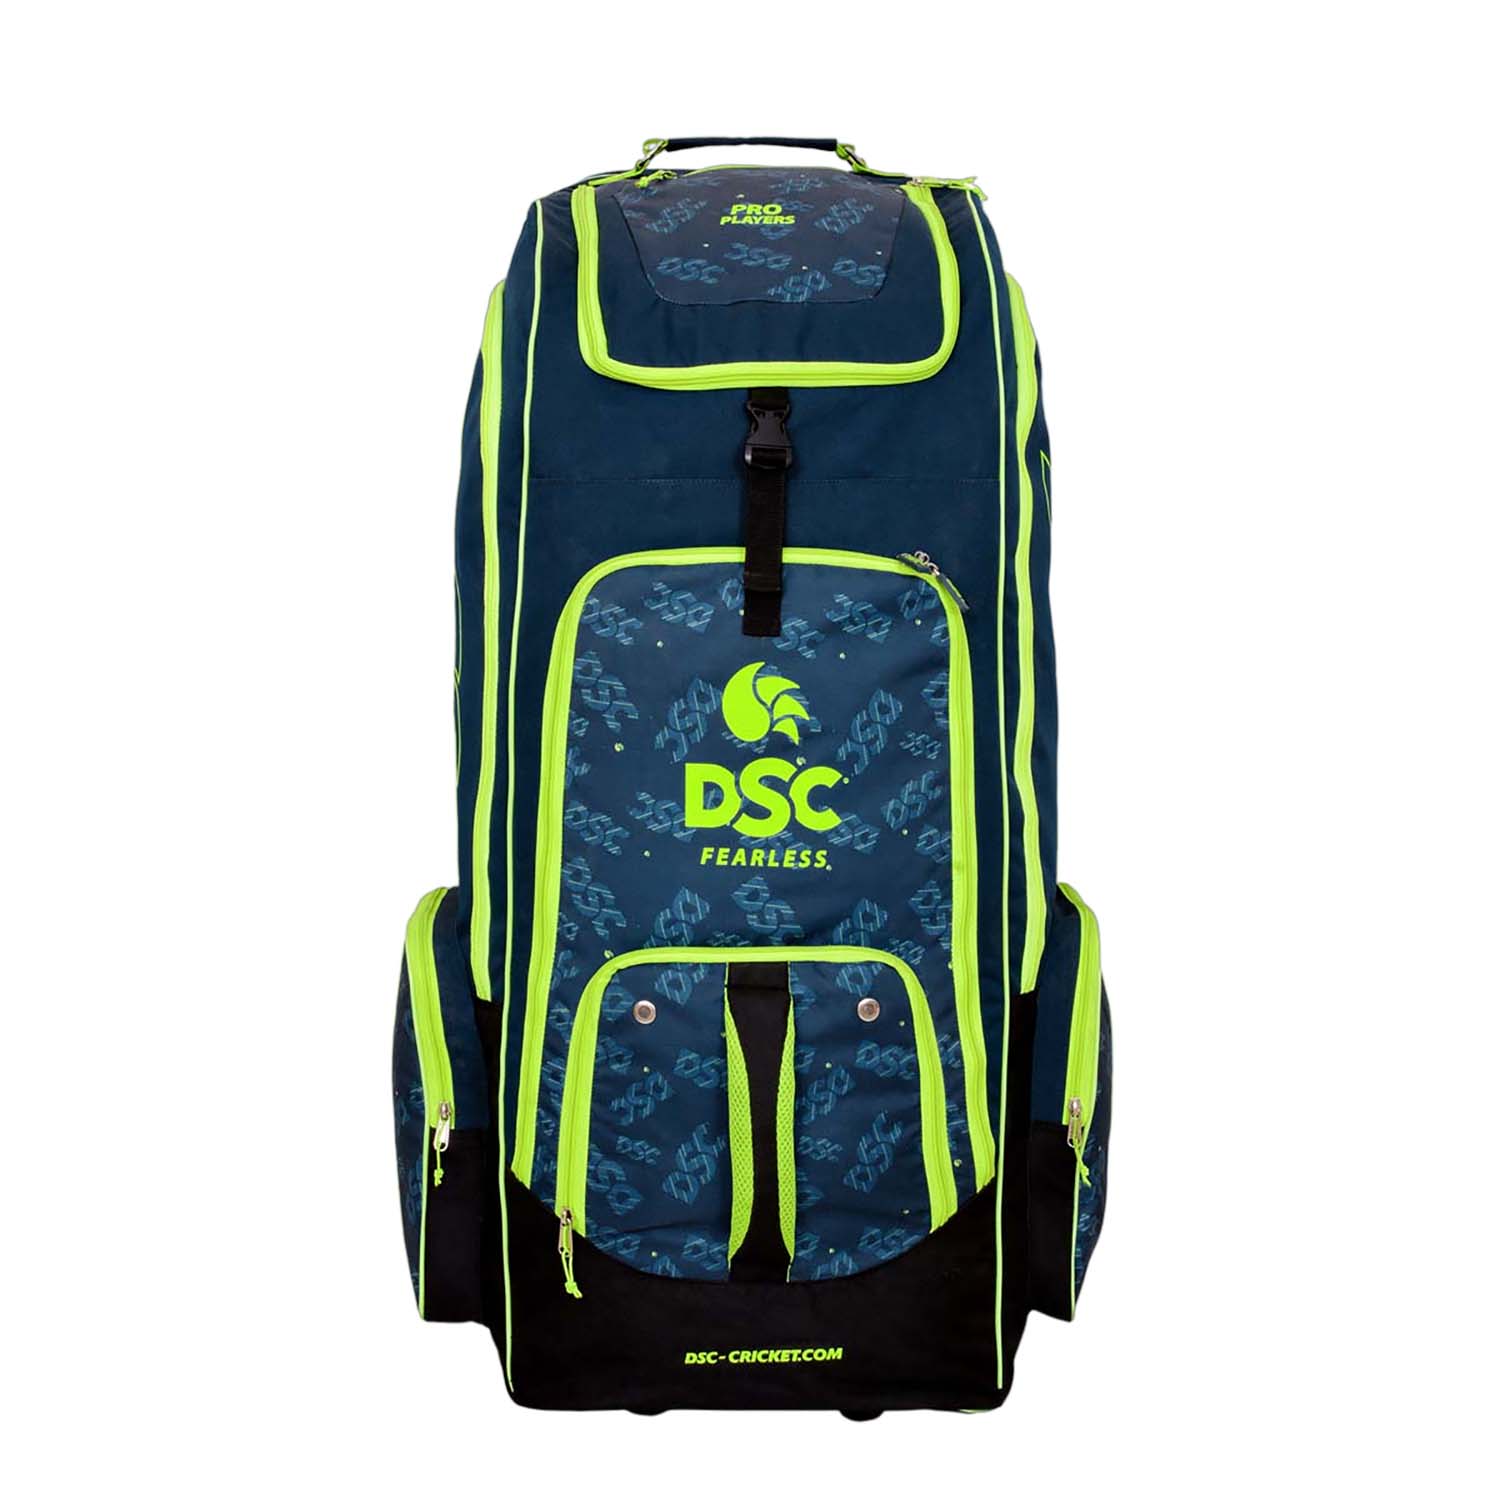 DSC Condor Pro Player Cricket Kit Bag From stagsports online Cricket Store